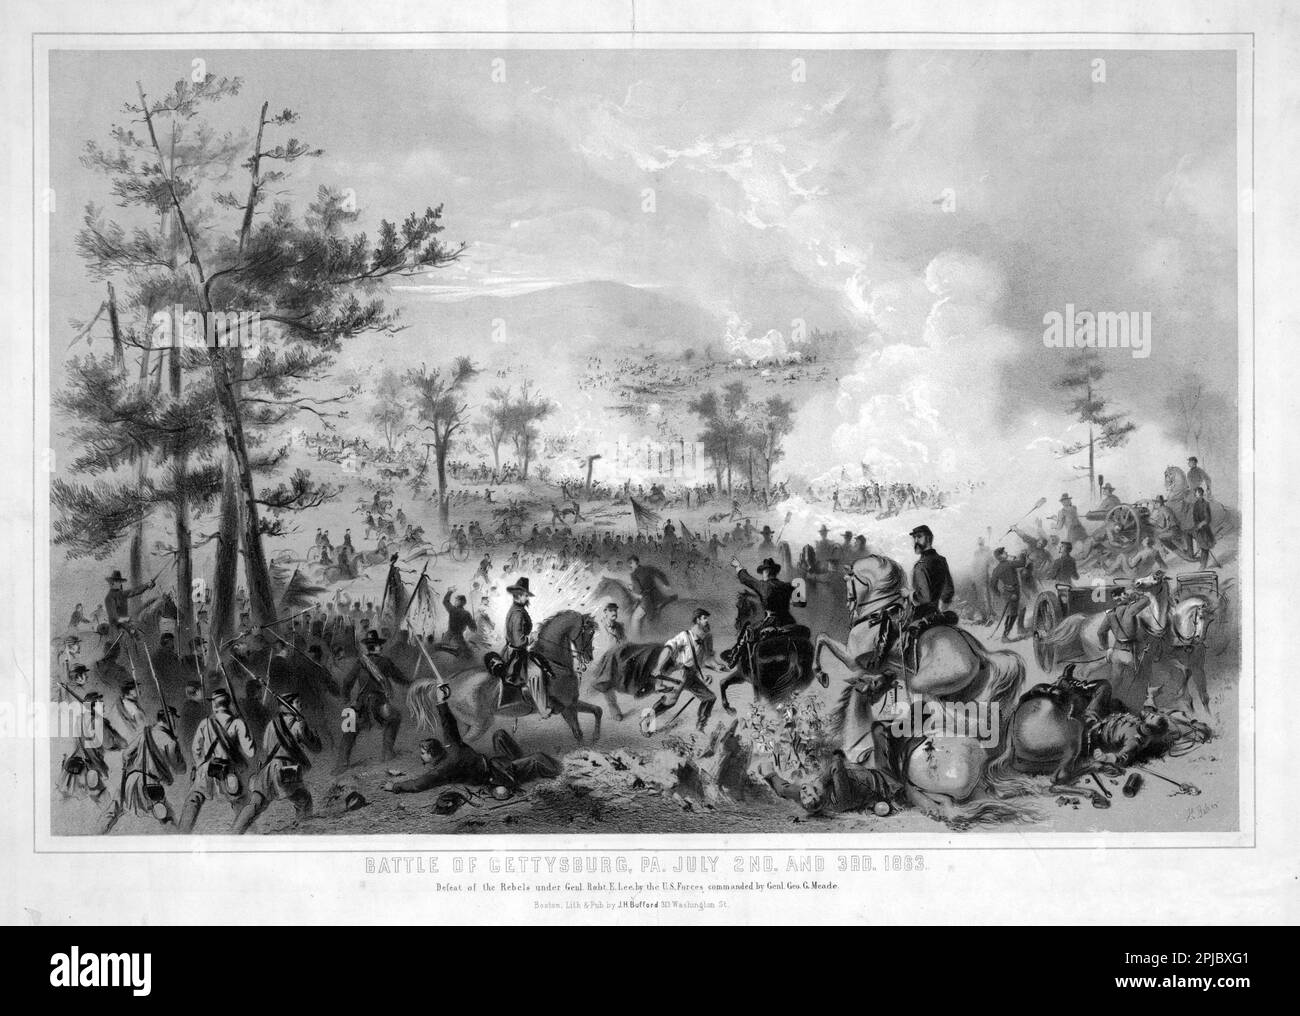 An illustration of the Battle of Gettysburg during the American Civil War. The Battle of Gettysberg represented the end of the Confederate troops northern movement and their defeat at Gettysburg is often seen as the turning point of the war. The battle saw 200,000 men meet in combat, with a combined death count of 8000. Stock Photo